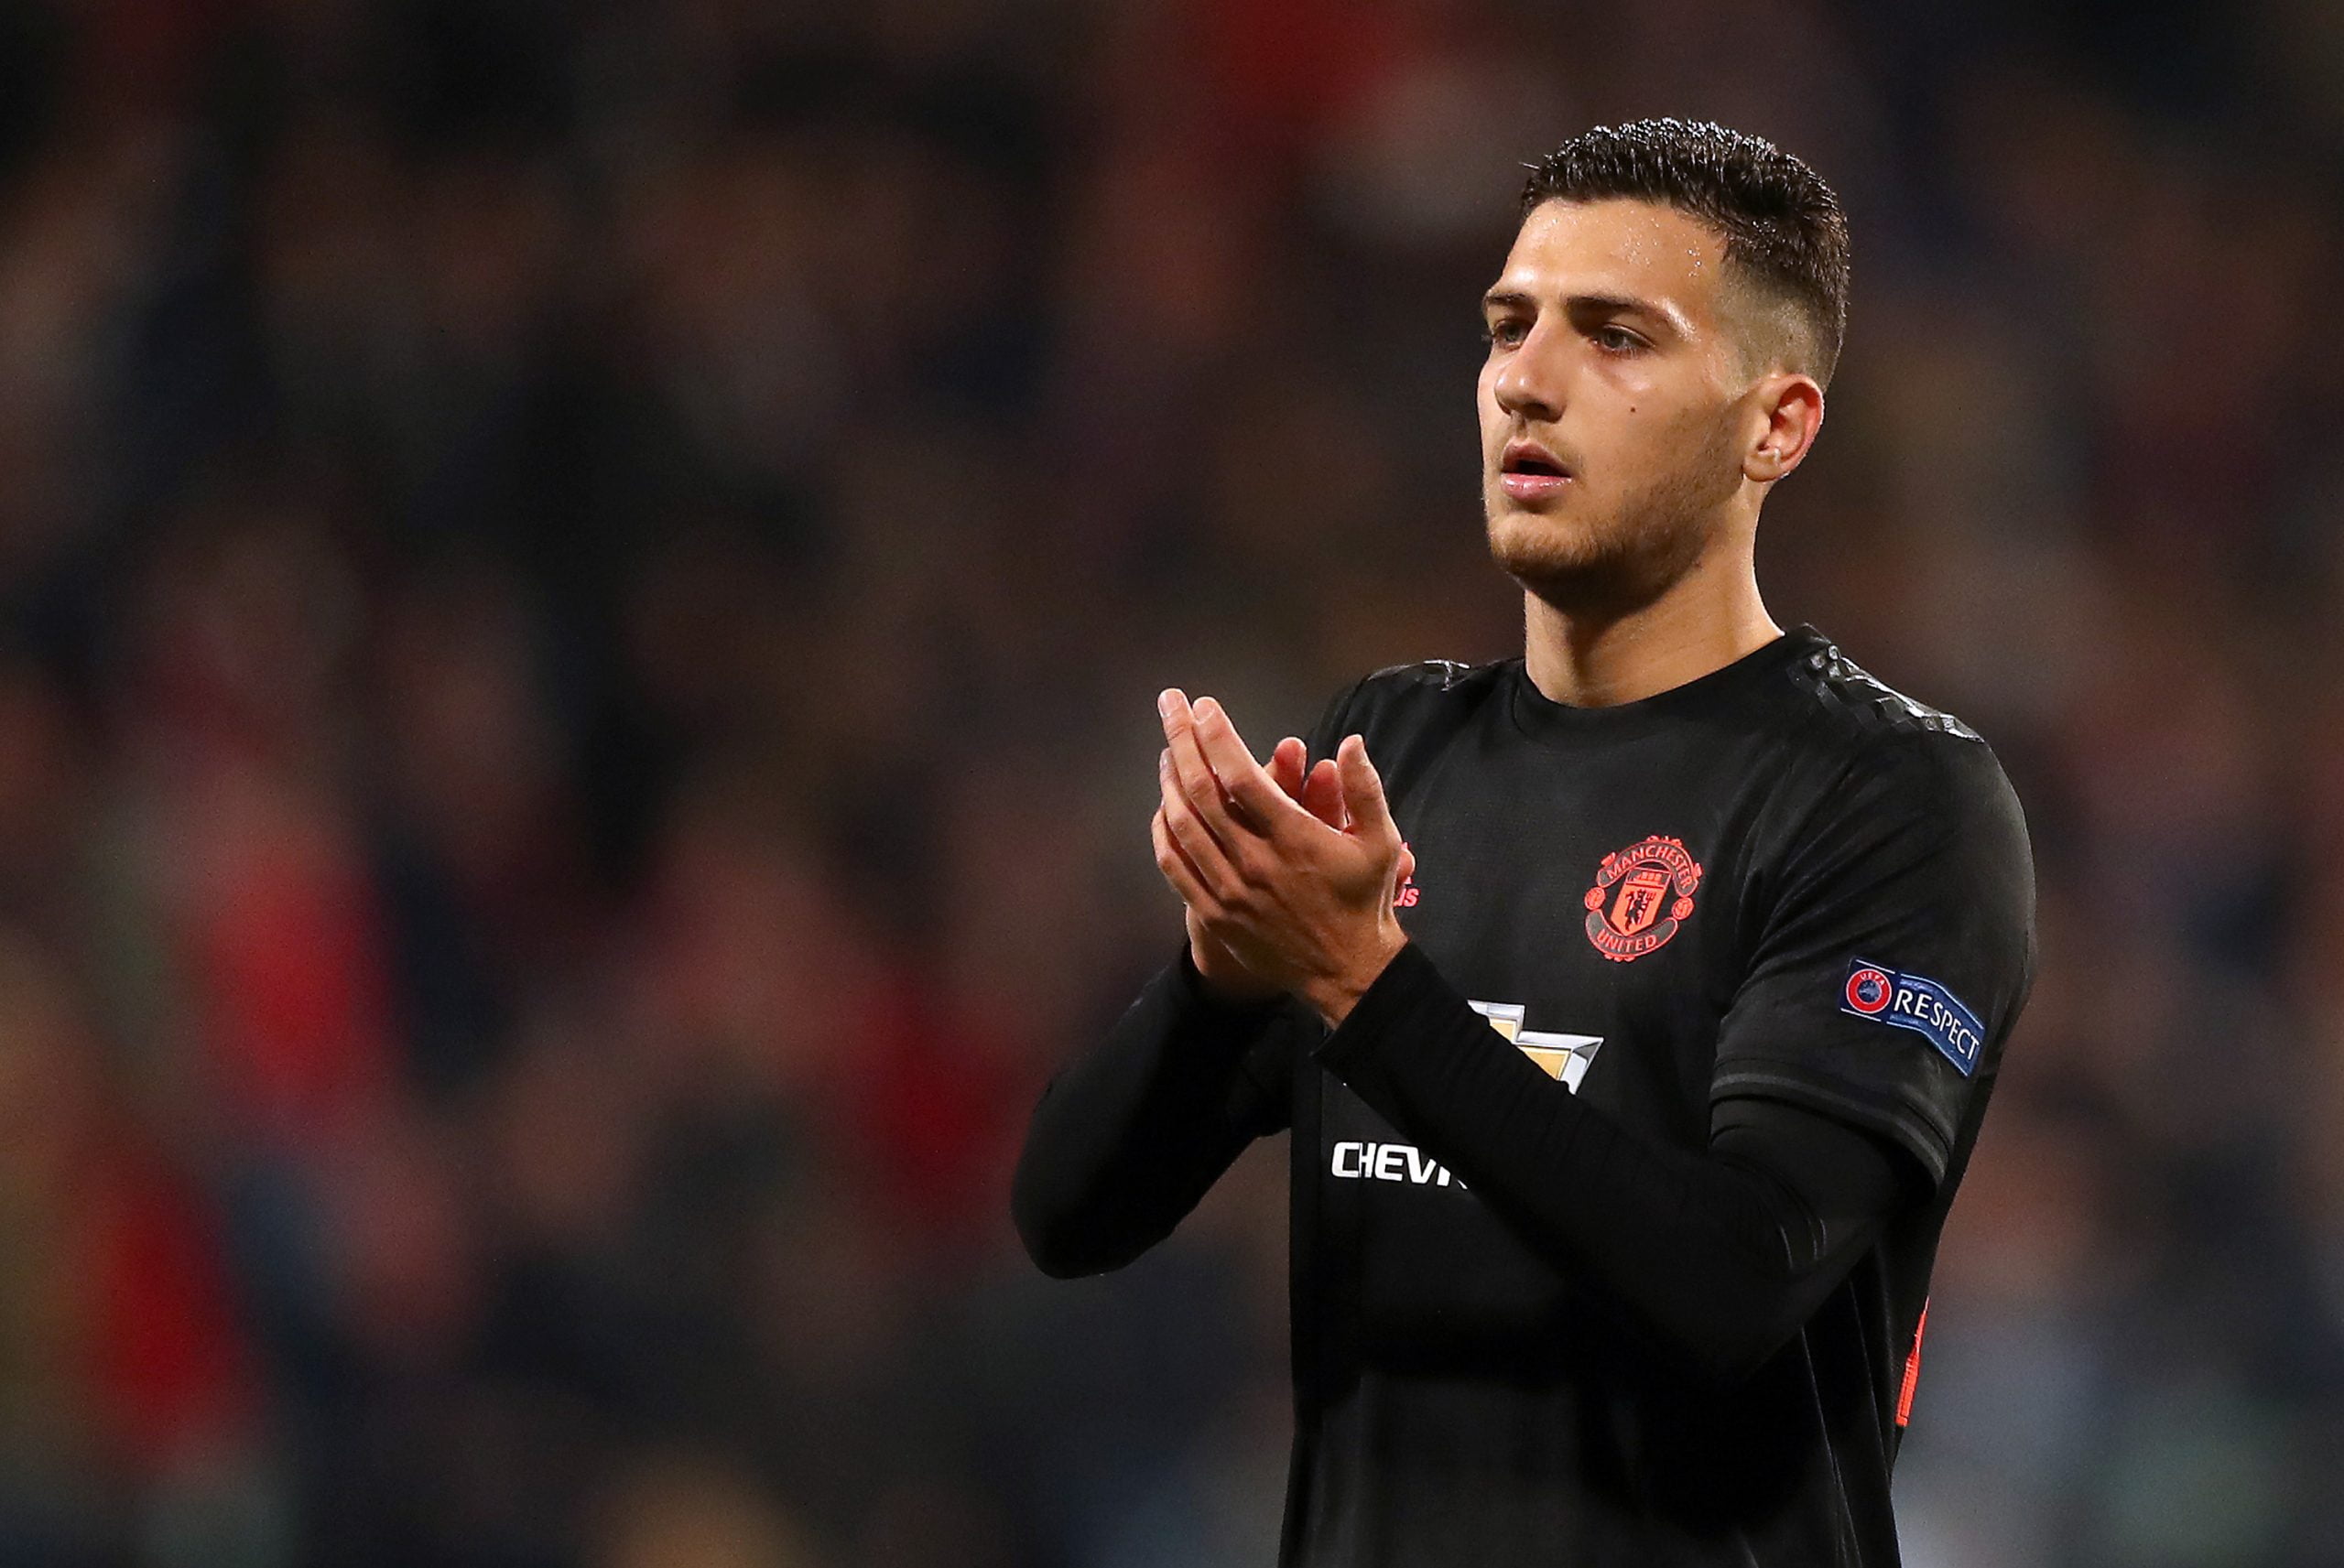 Diogo Dalot is still wanted by FC Barcelona